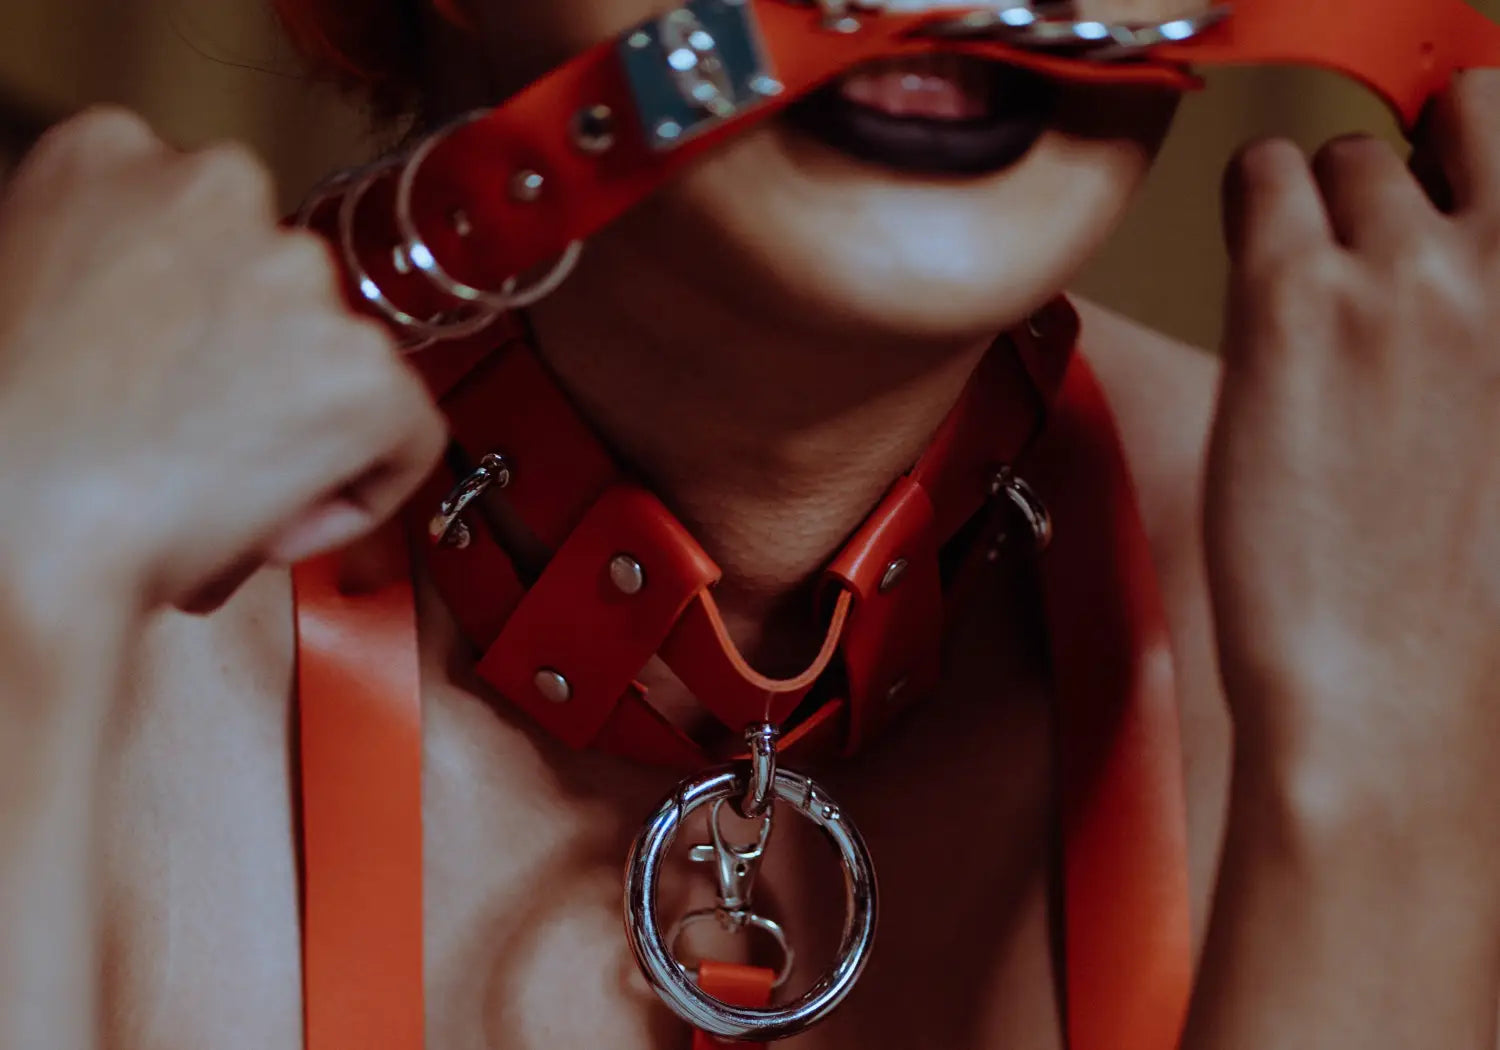 Woman biting red leather restraint Photo by Kamaji Ogino from Pexels